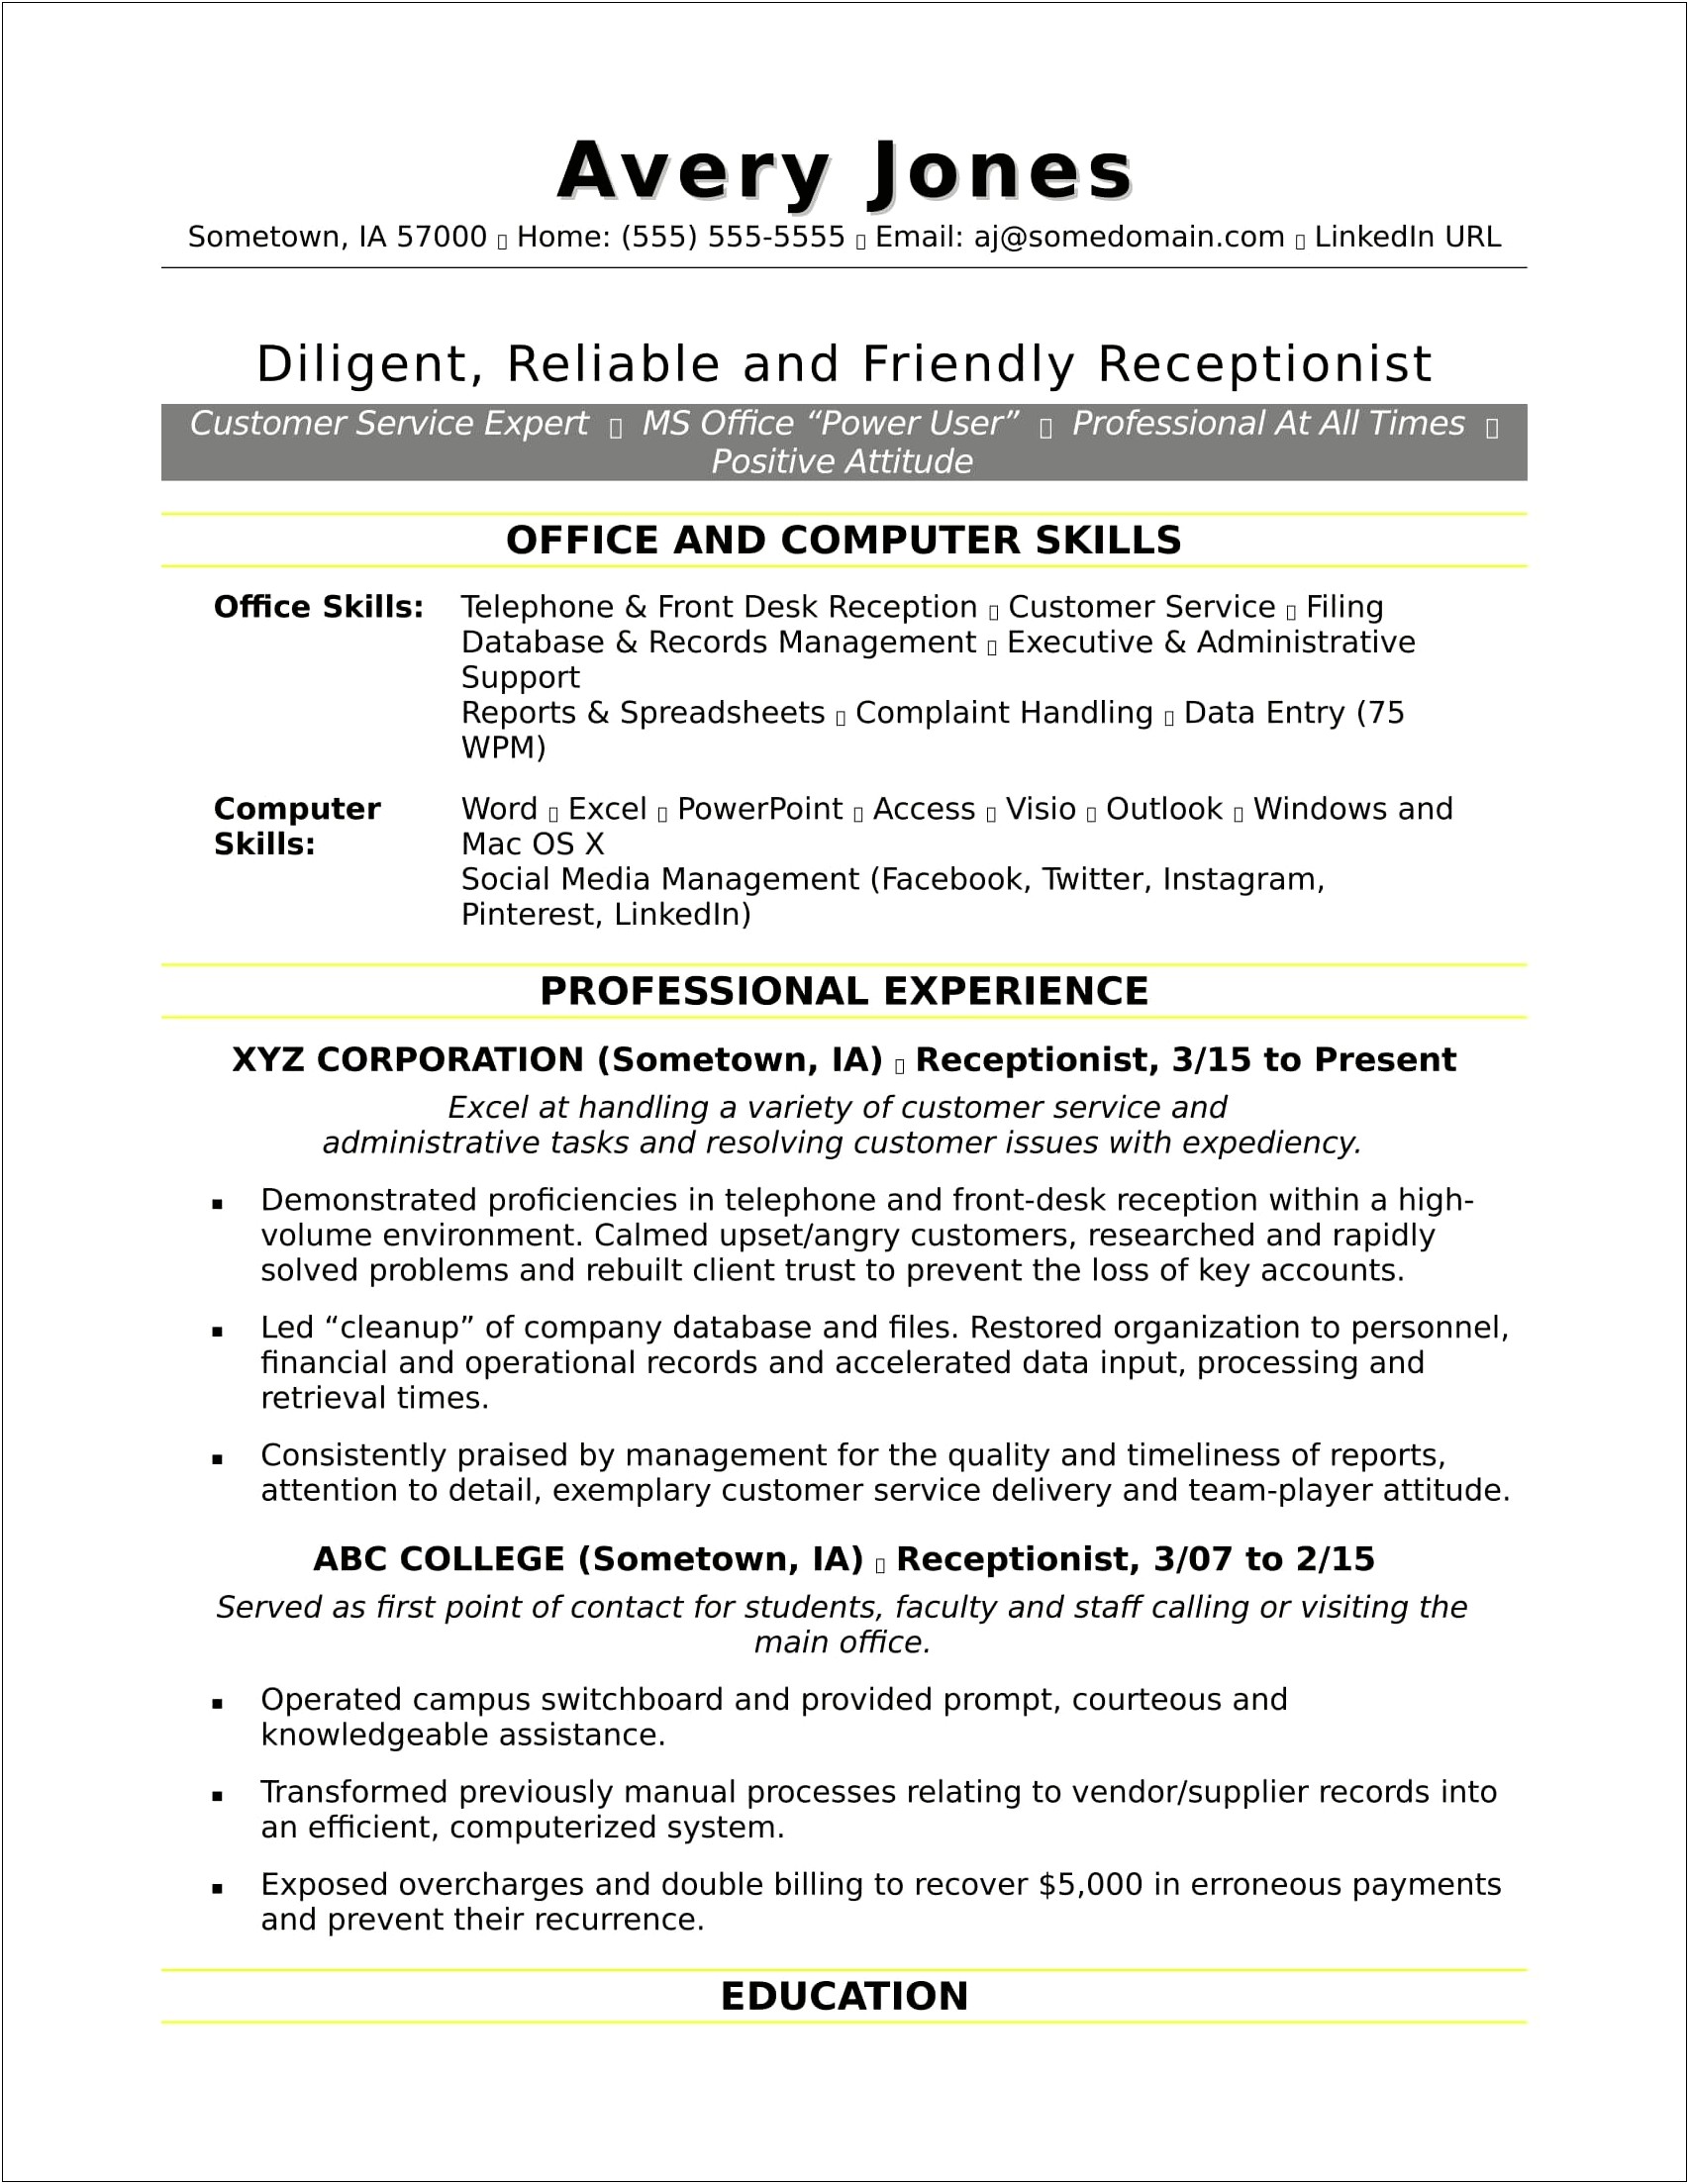 Resume Samples For Receptionist In A Hotel